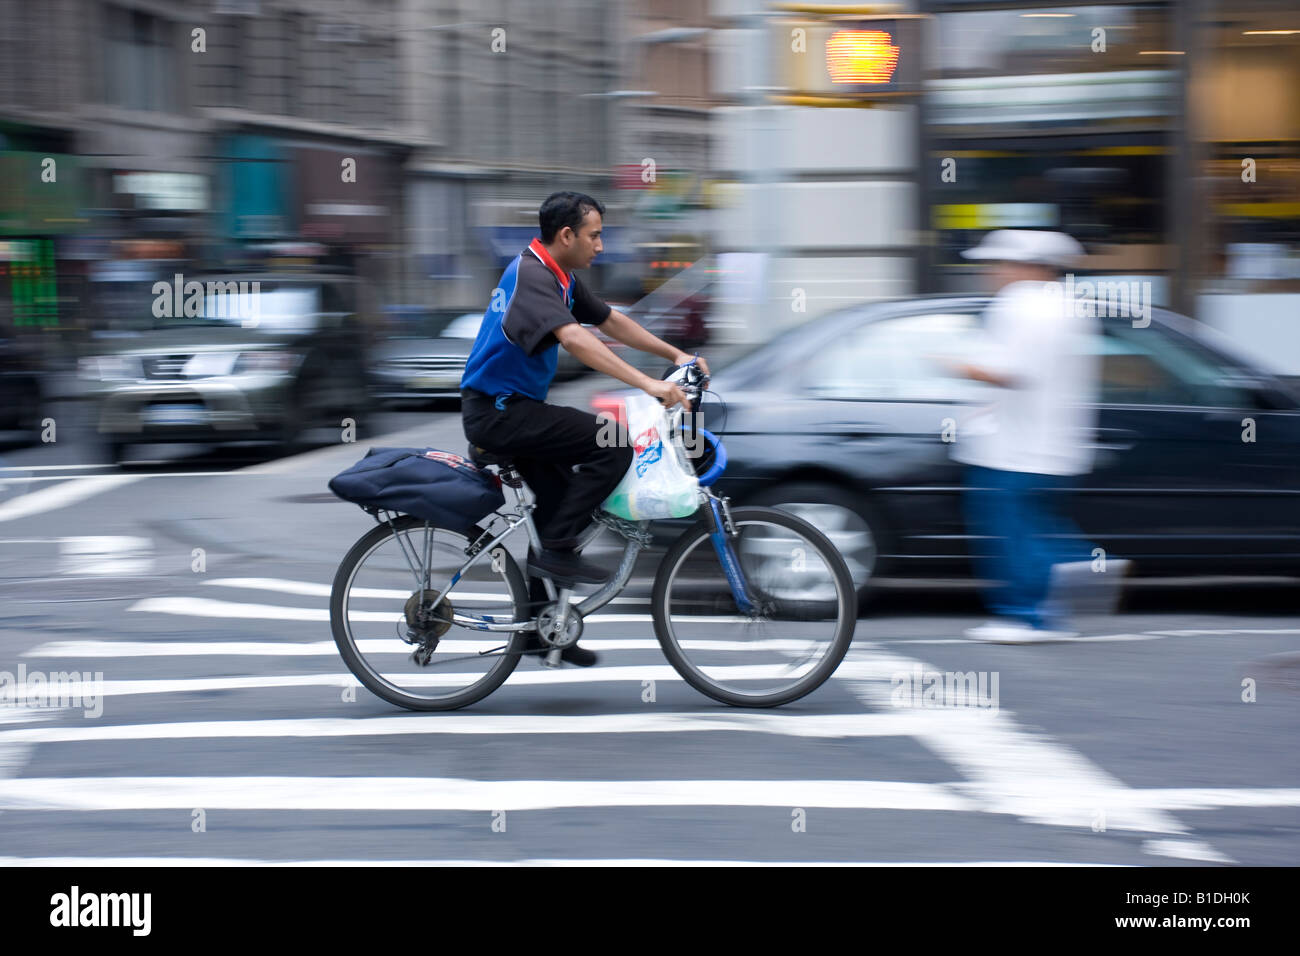 A pizza delivery person in Manhattan, NY Stock Photo